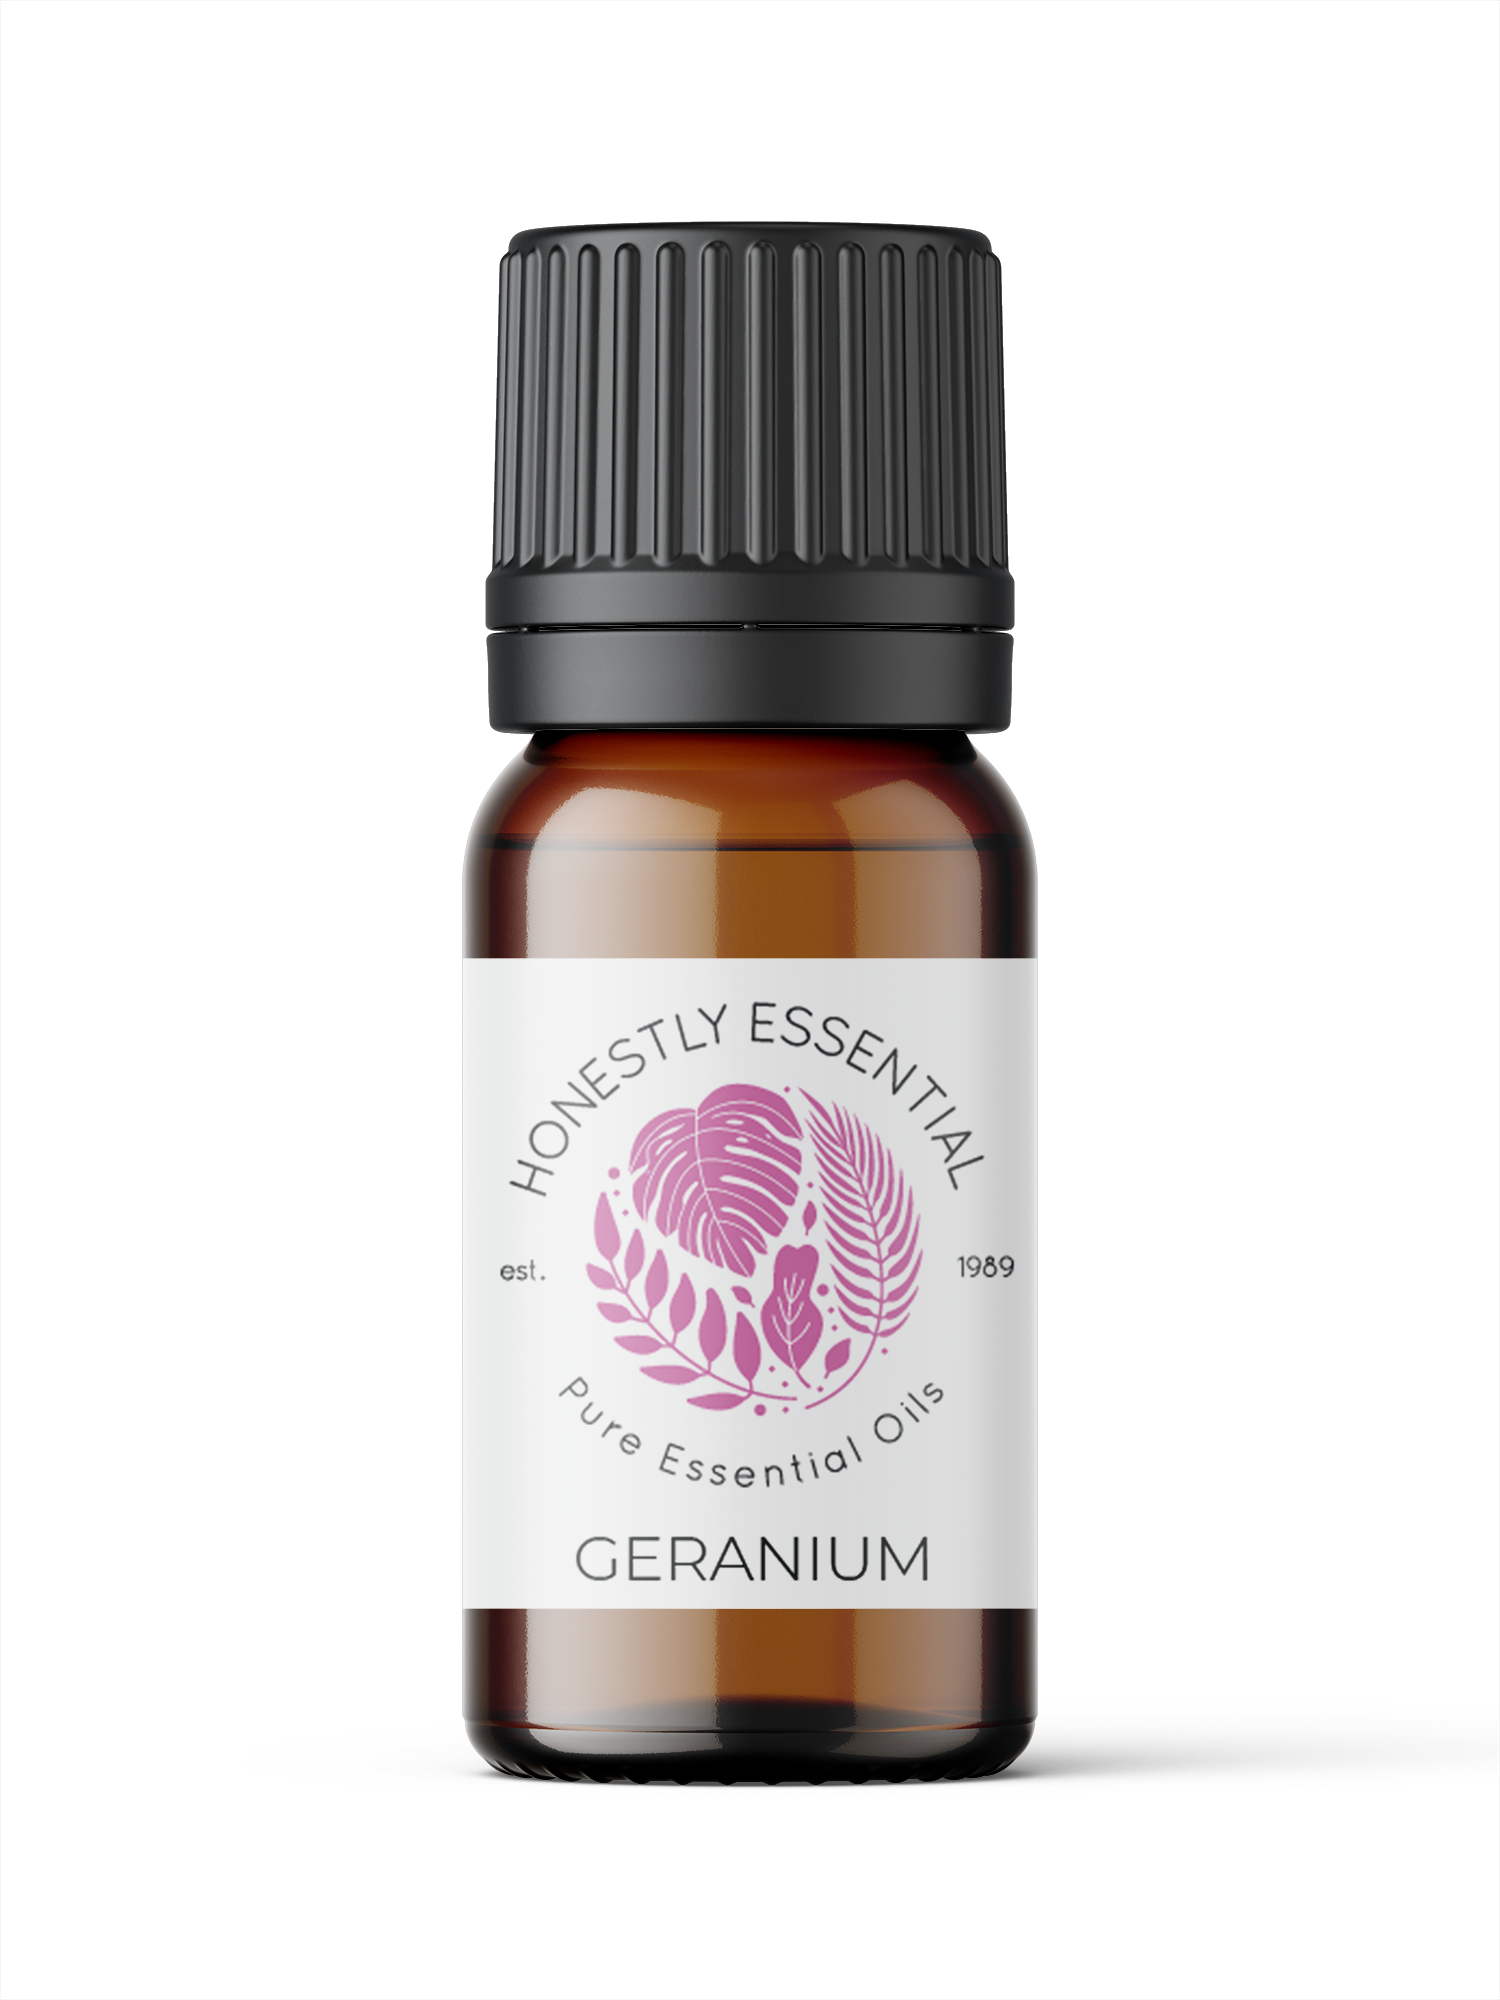 Geranium Essential Oil - Essential Oils | Honestly Essential Oils anxiety, bruising, depression, Insect and Pest Repellent, kid safe, skin, skin health, sores, wounds